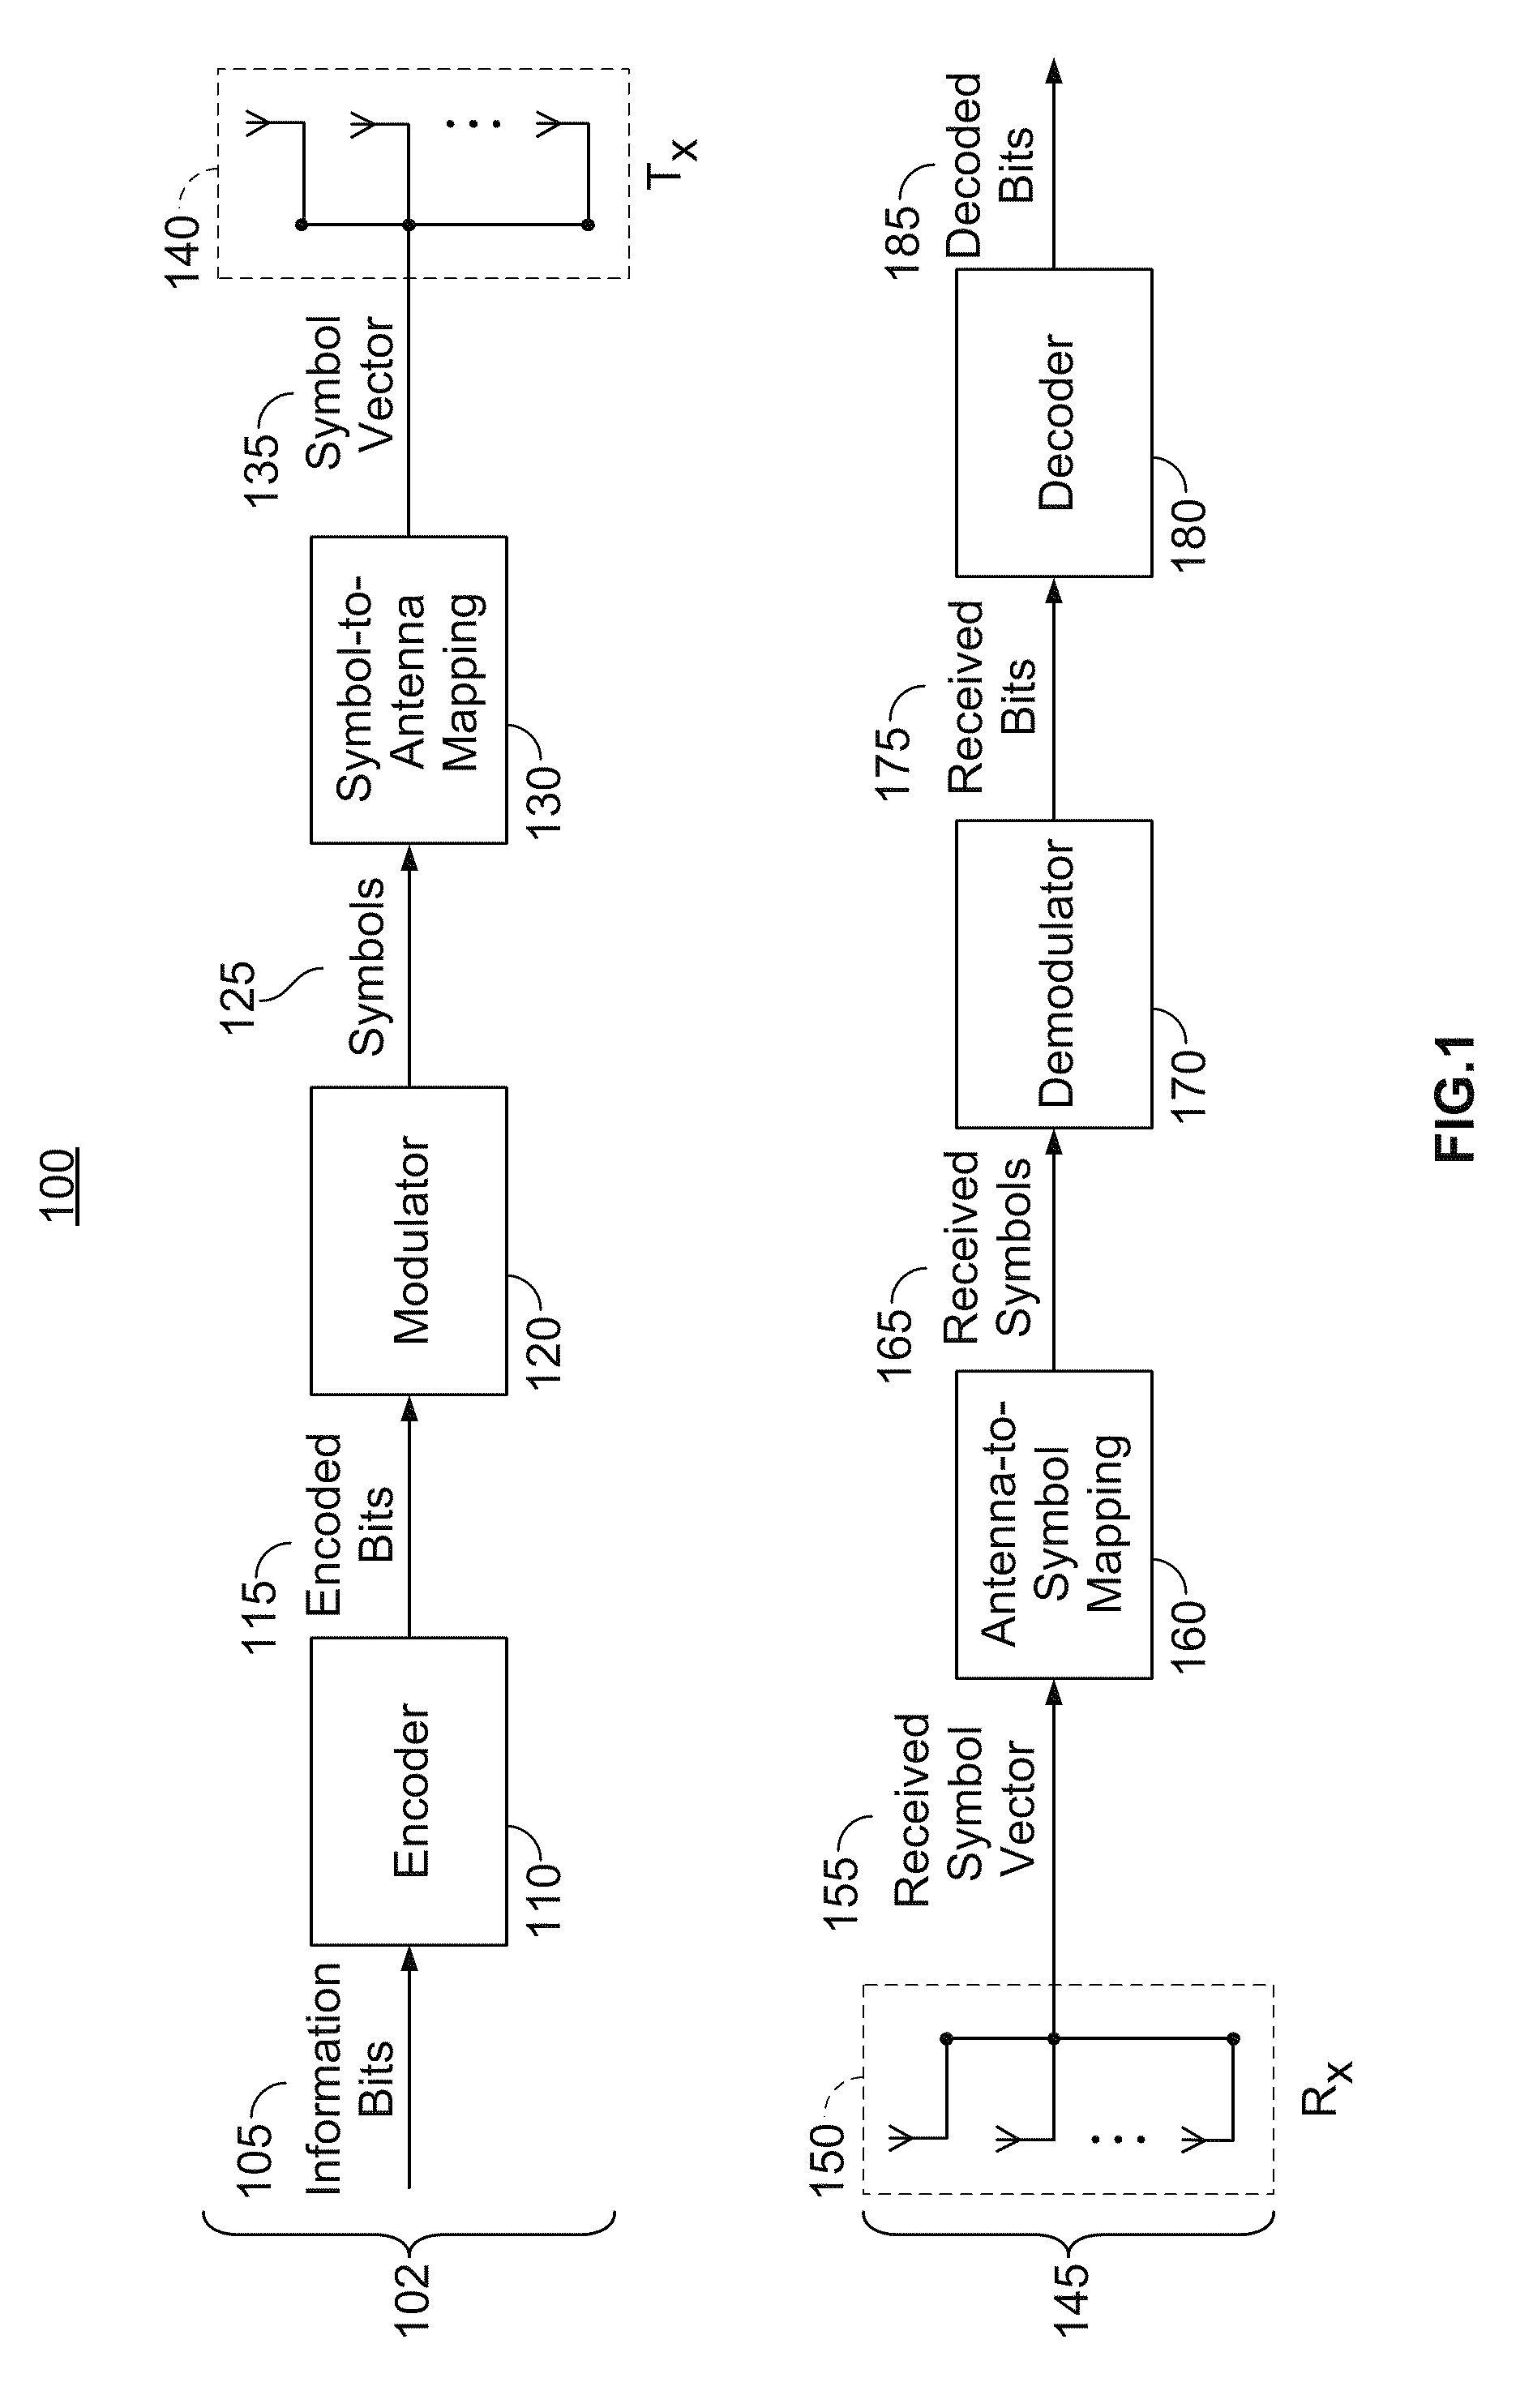 Symbol vector-level combining transmitter for incremental redundancy HARQ with MIMO